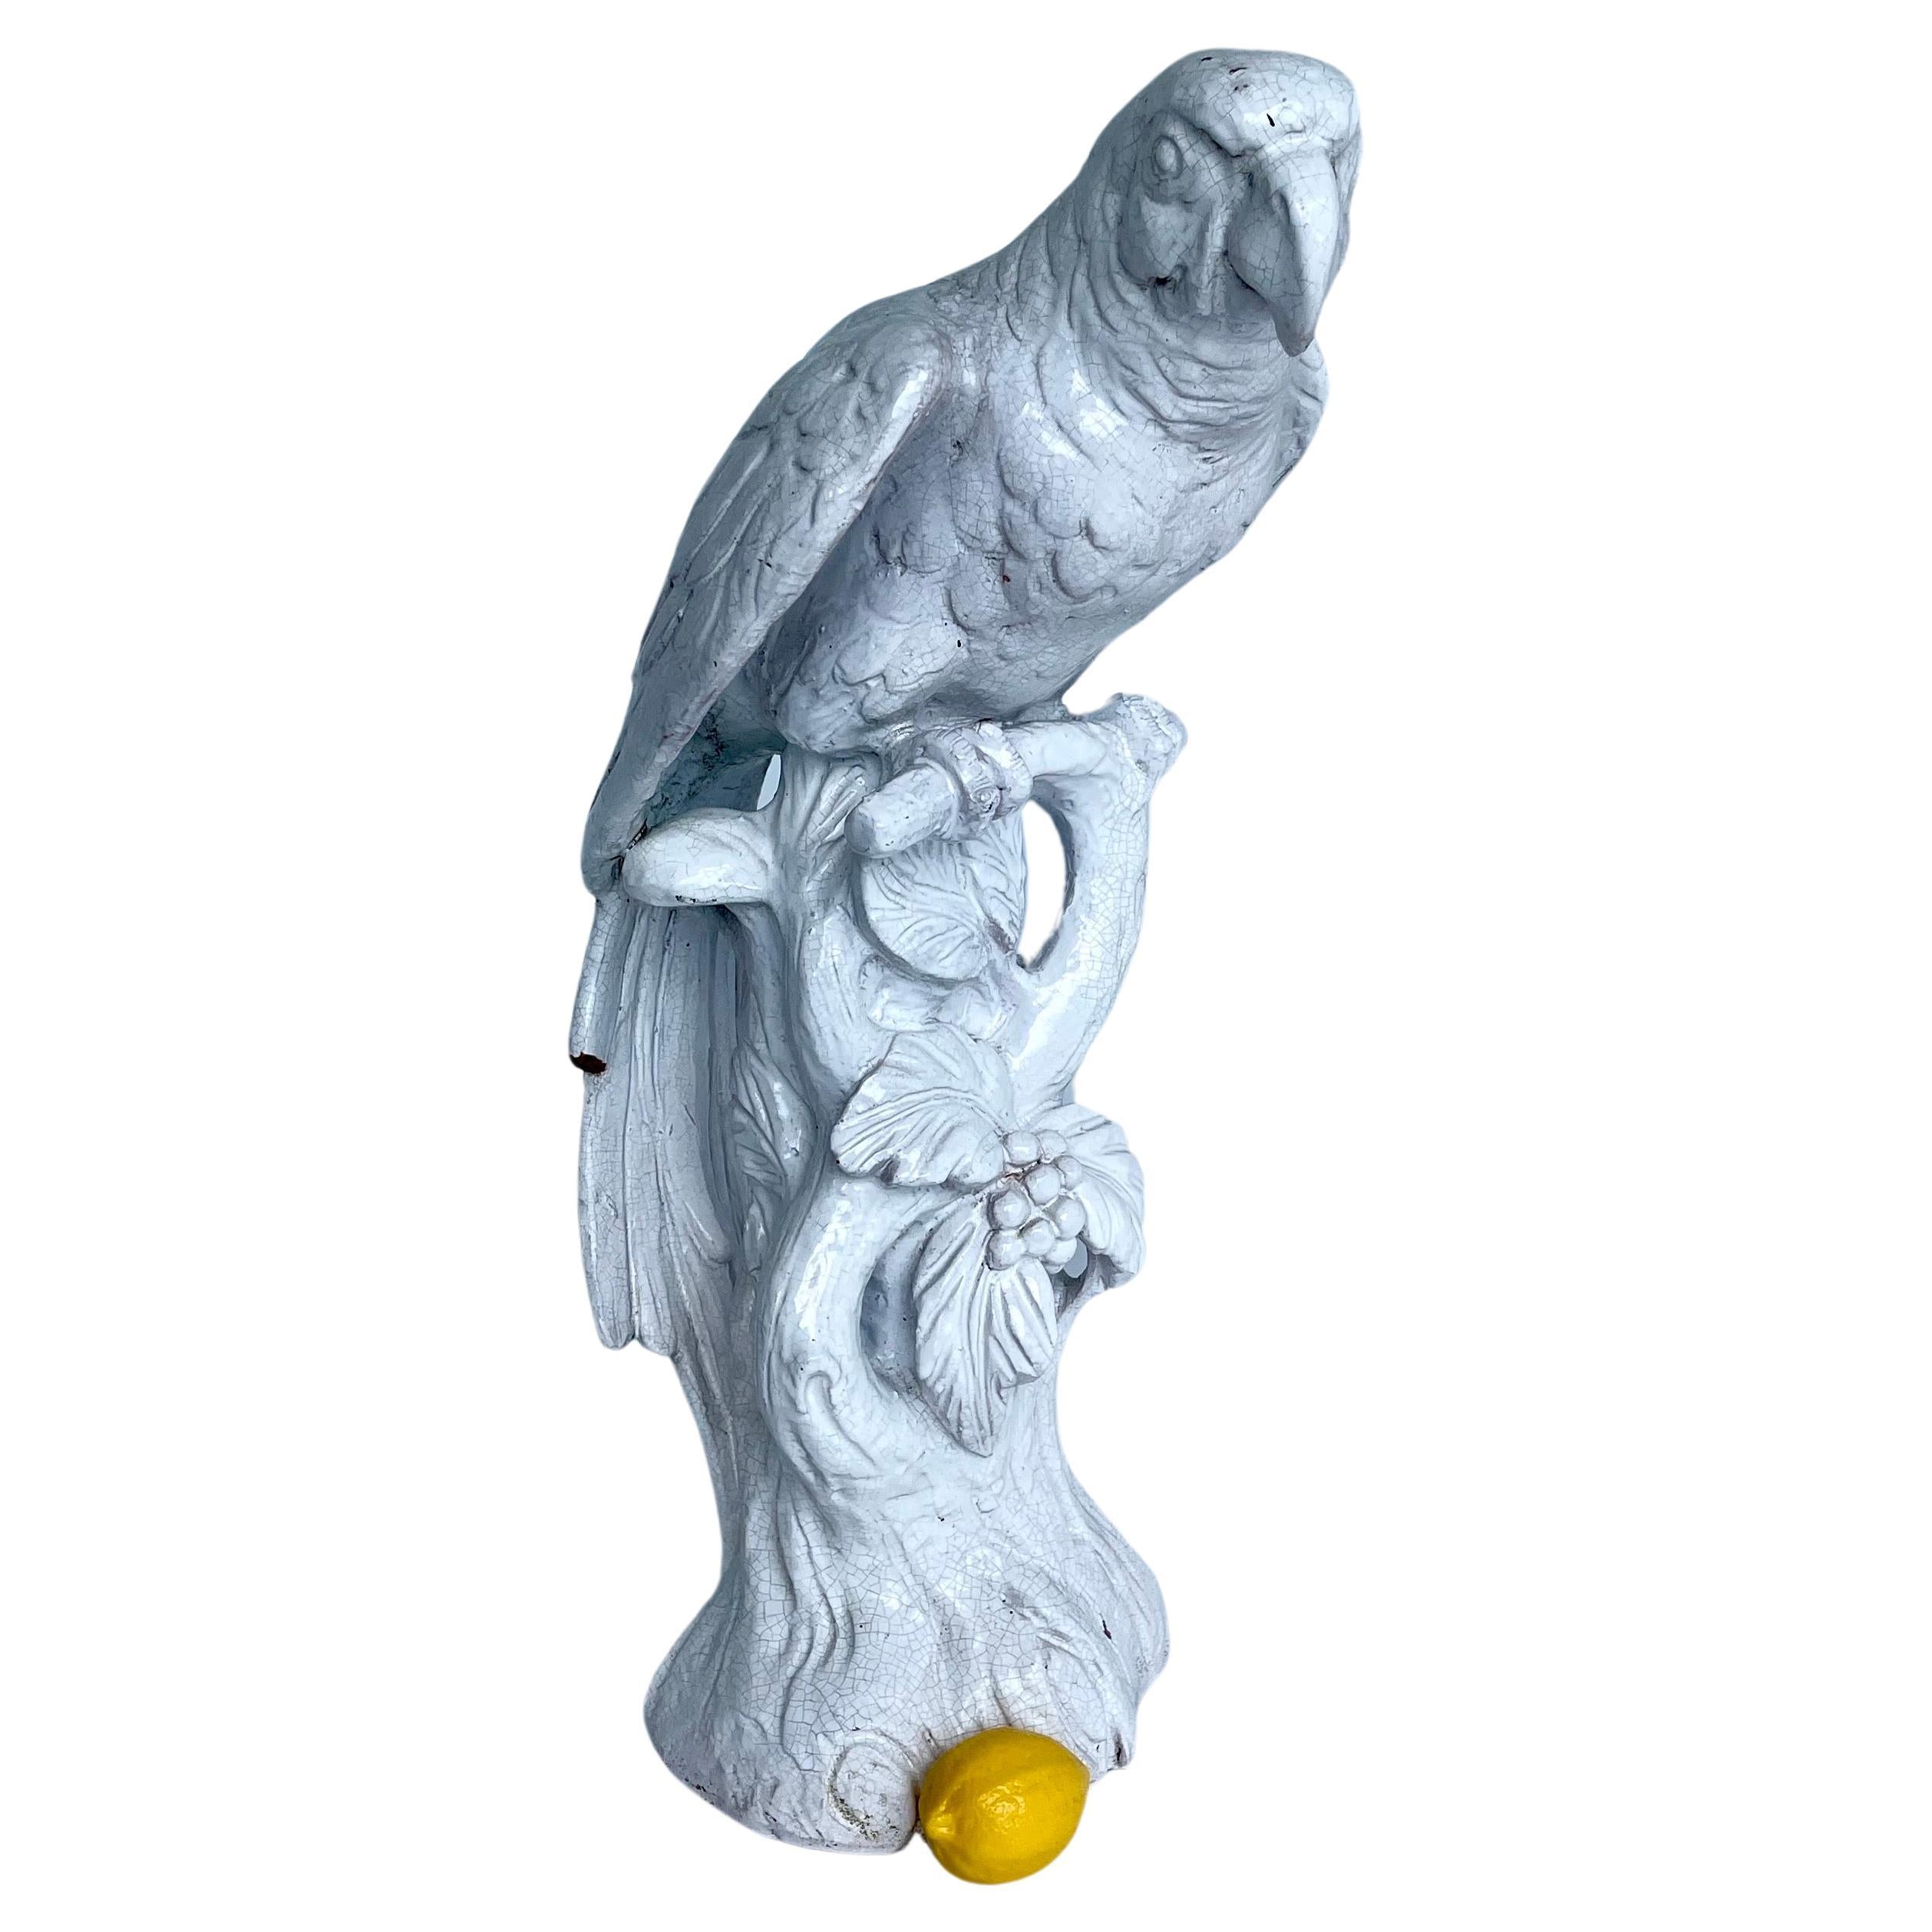 Tall White Porcelain Parrot Sculpture with White Glaze, Italy 1960's

This large life-like parrot is perched on a branch with a faux bois base decorated with leaves. This sculpture would be an exquisite addition to a coffee or side table as well as